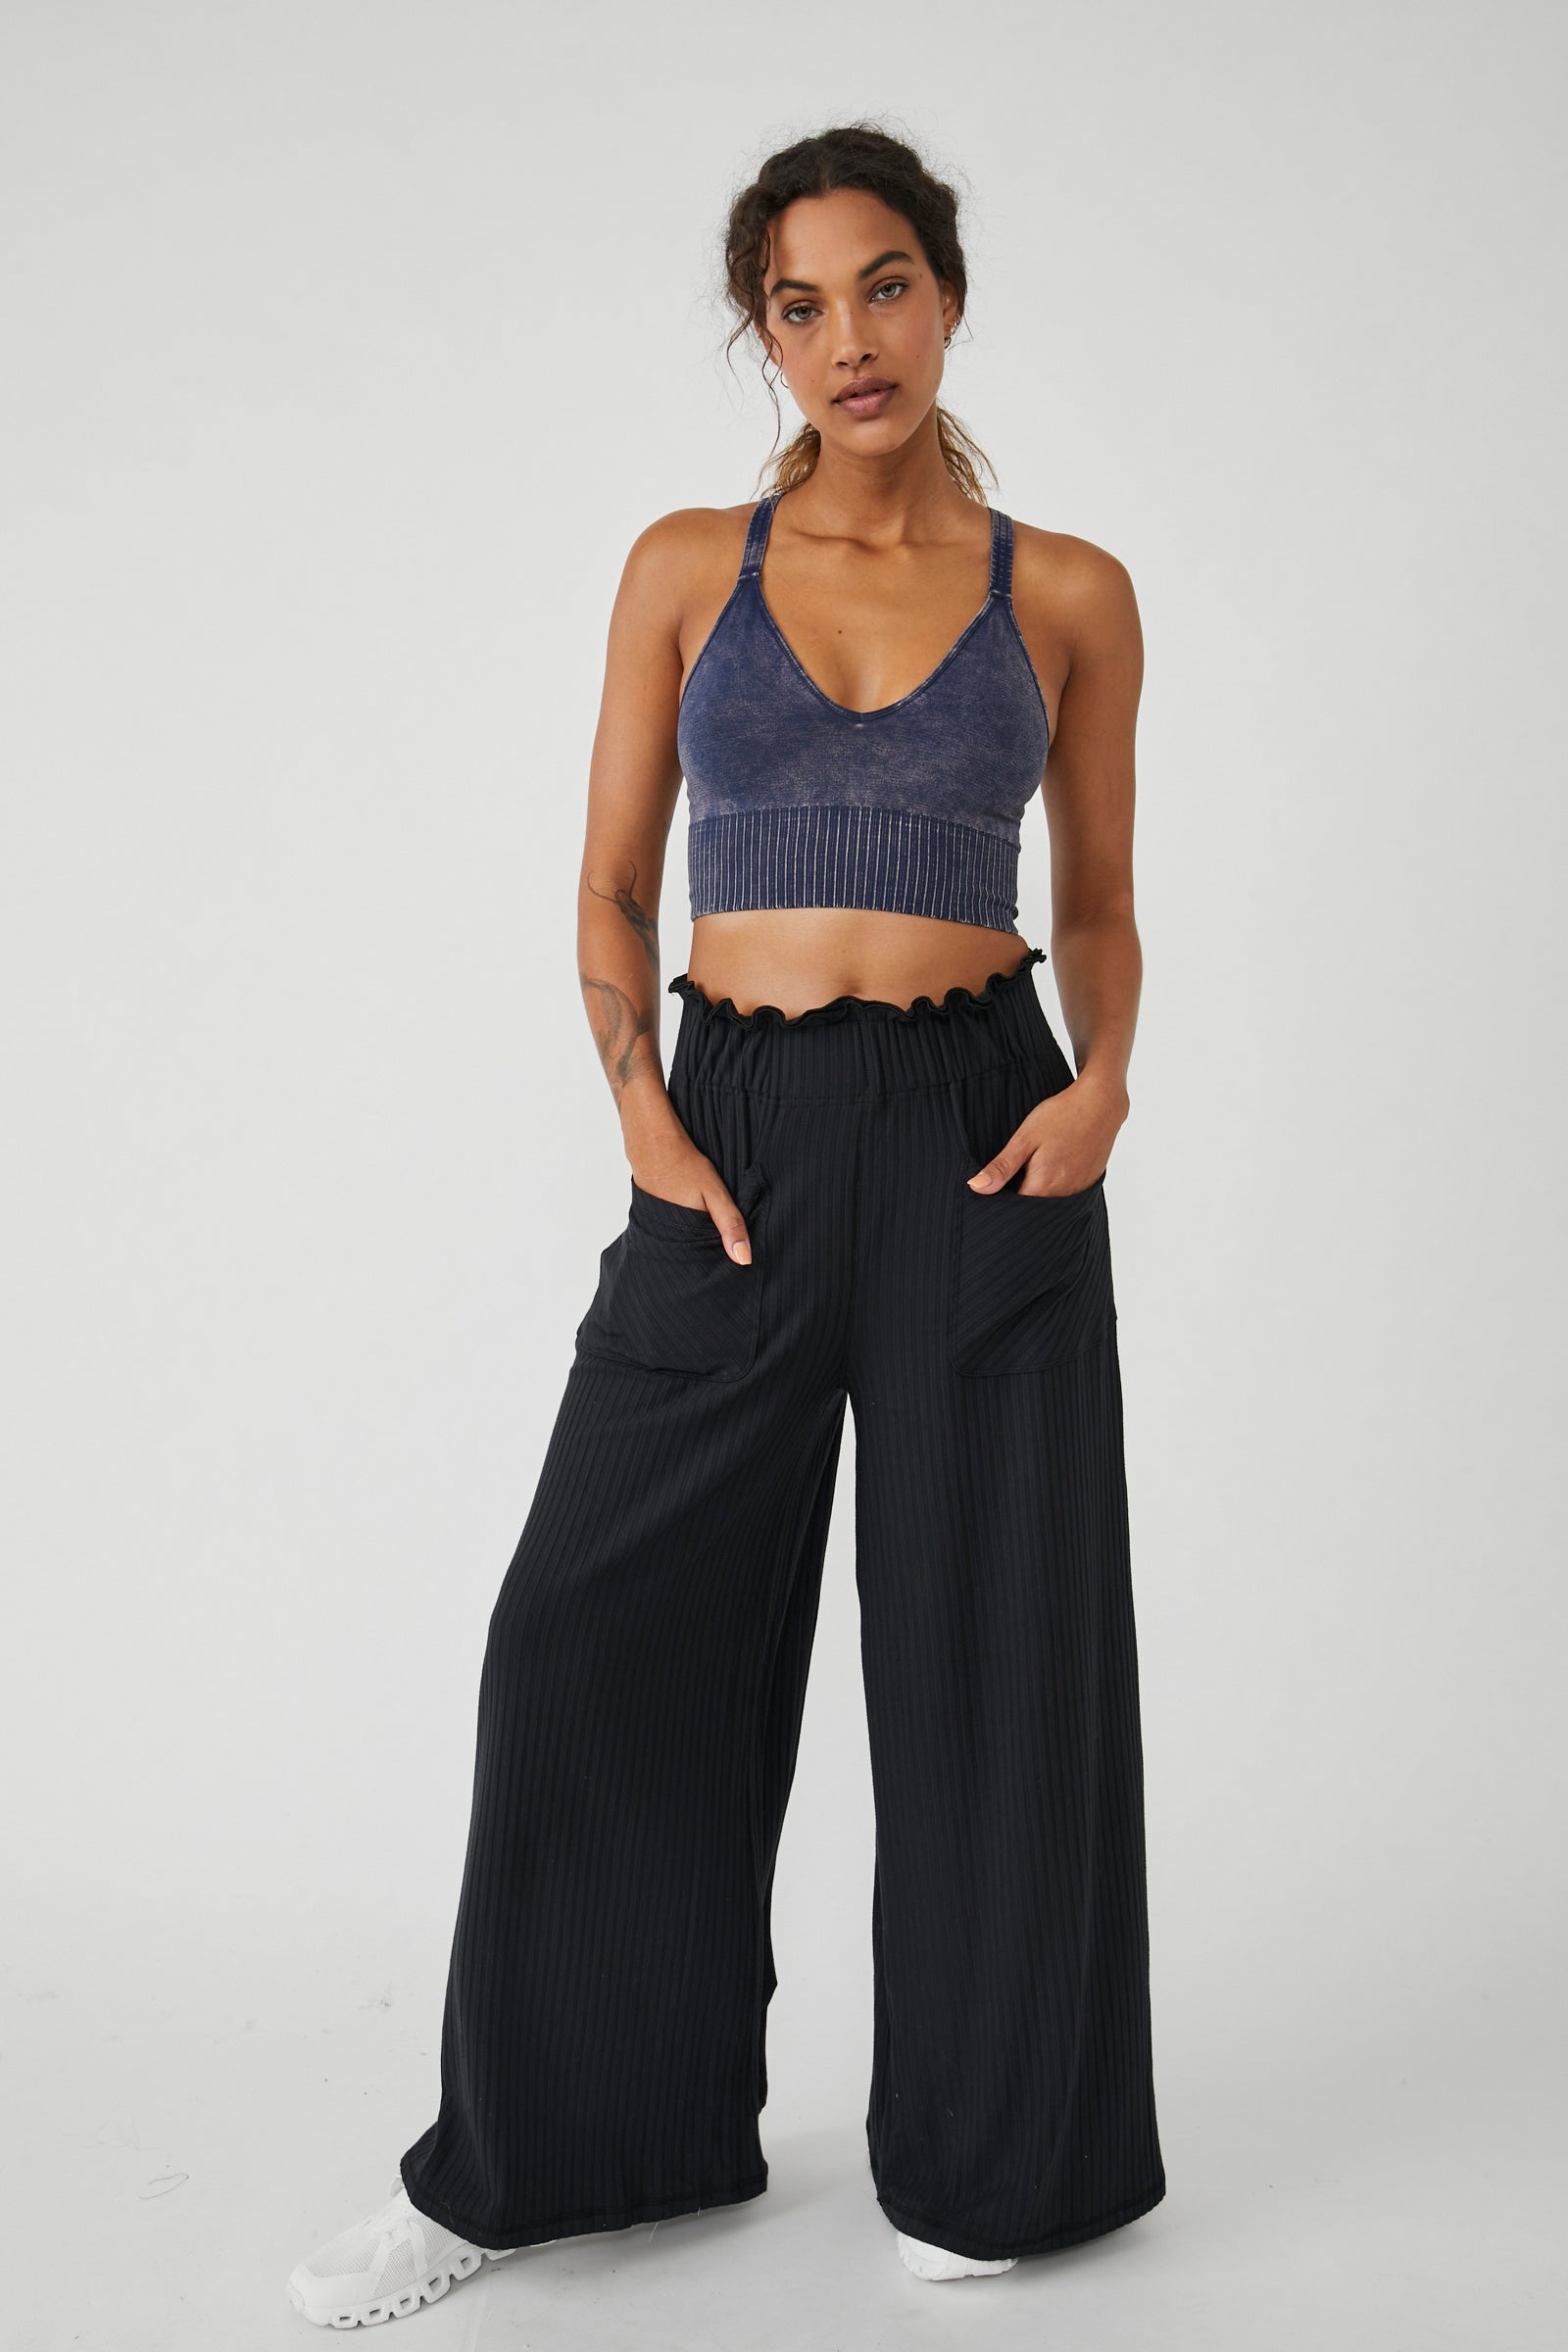 FREE PEOPLE MOVEMENT BLISSED OUT WIDE LEG PANTS - BLACK 6937 – Work It Out